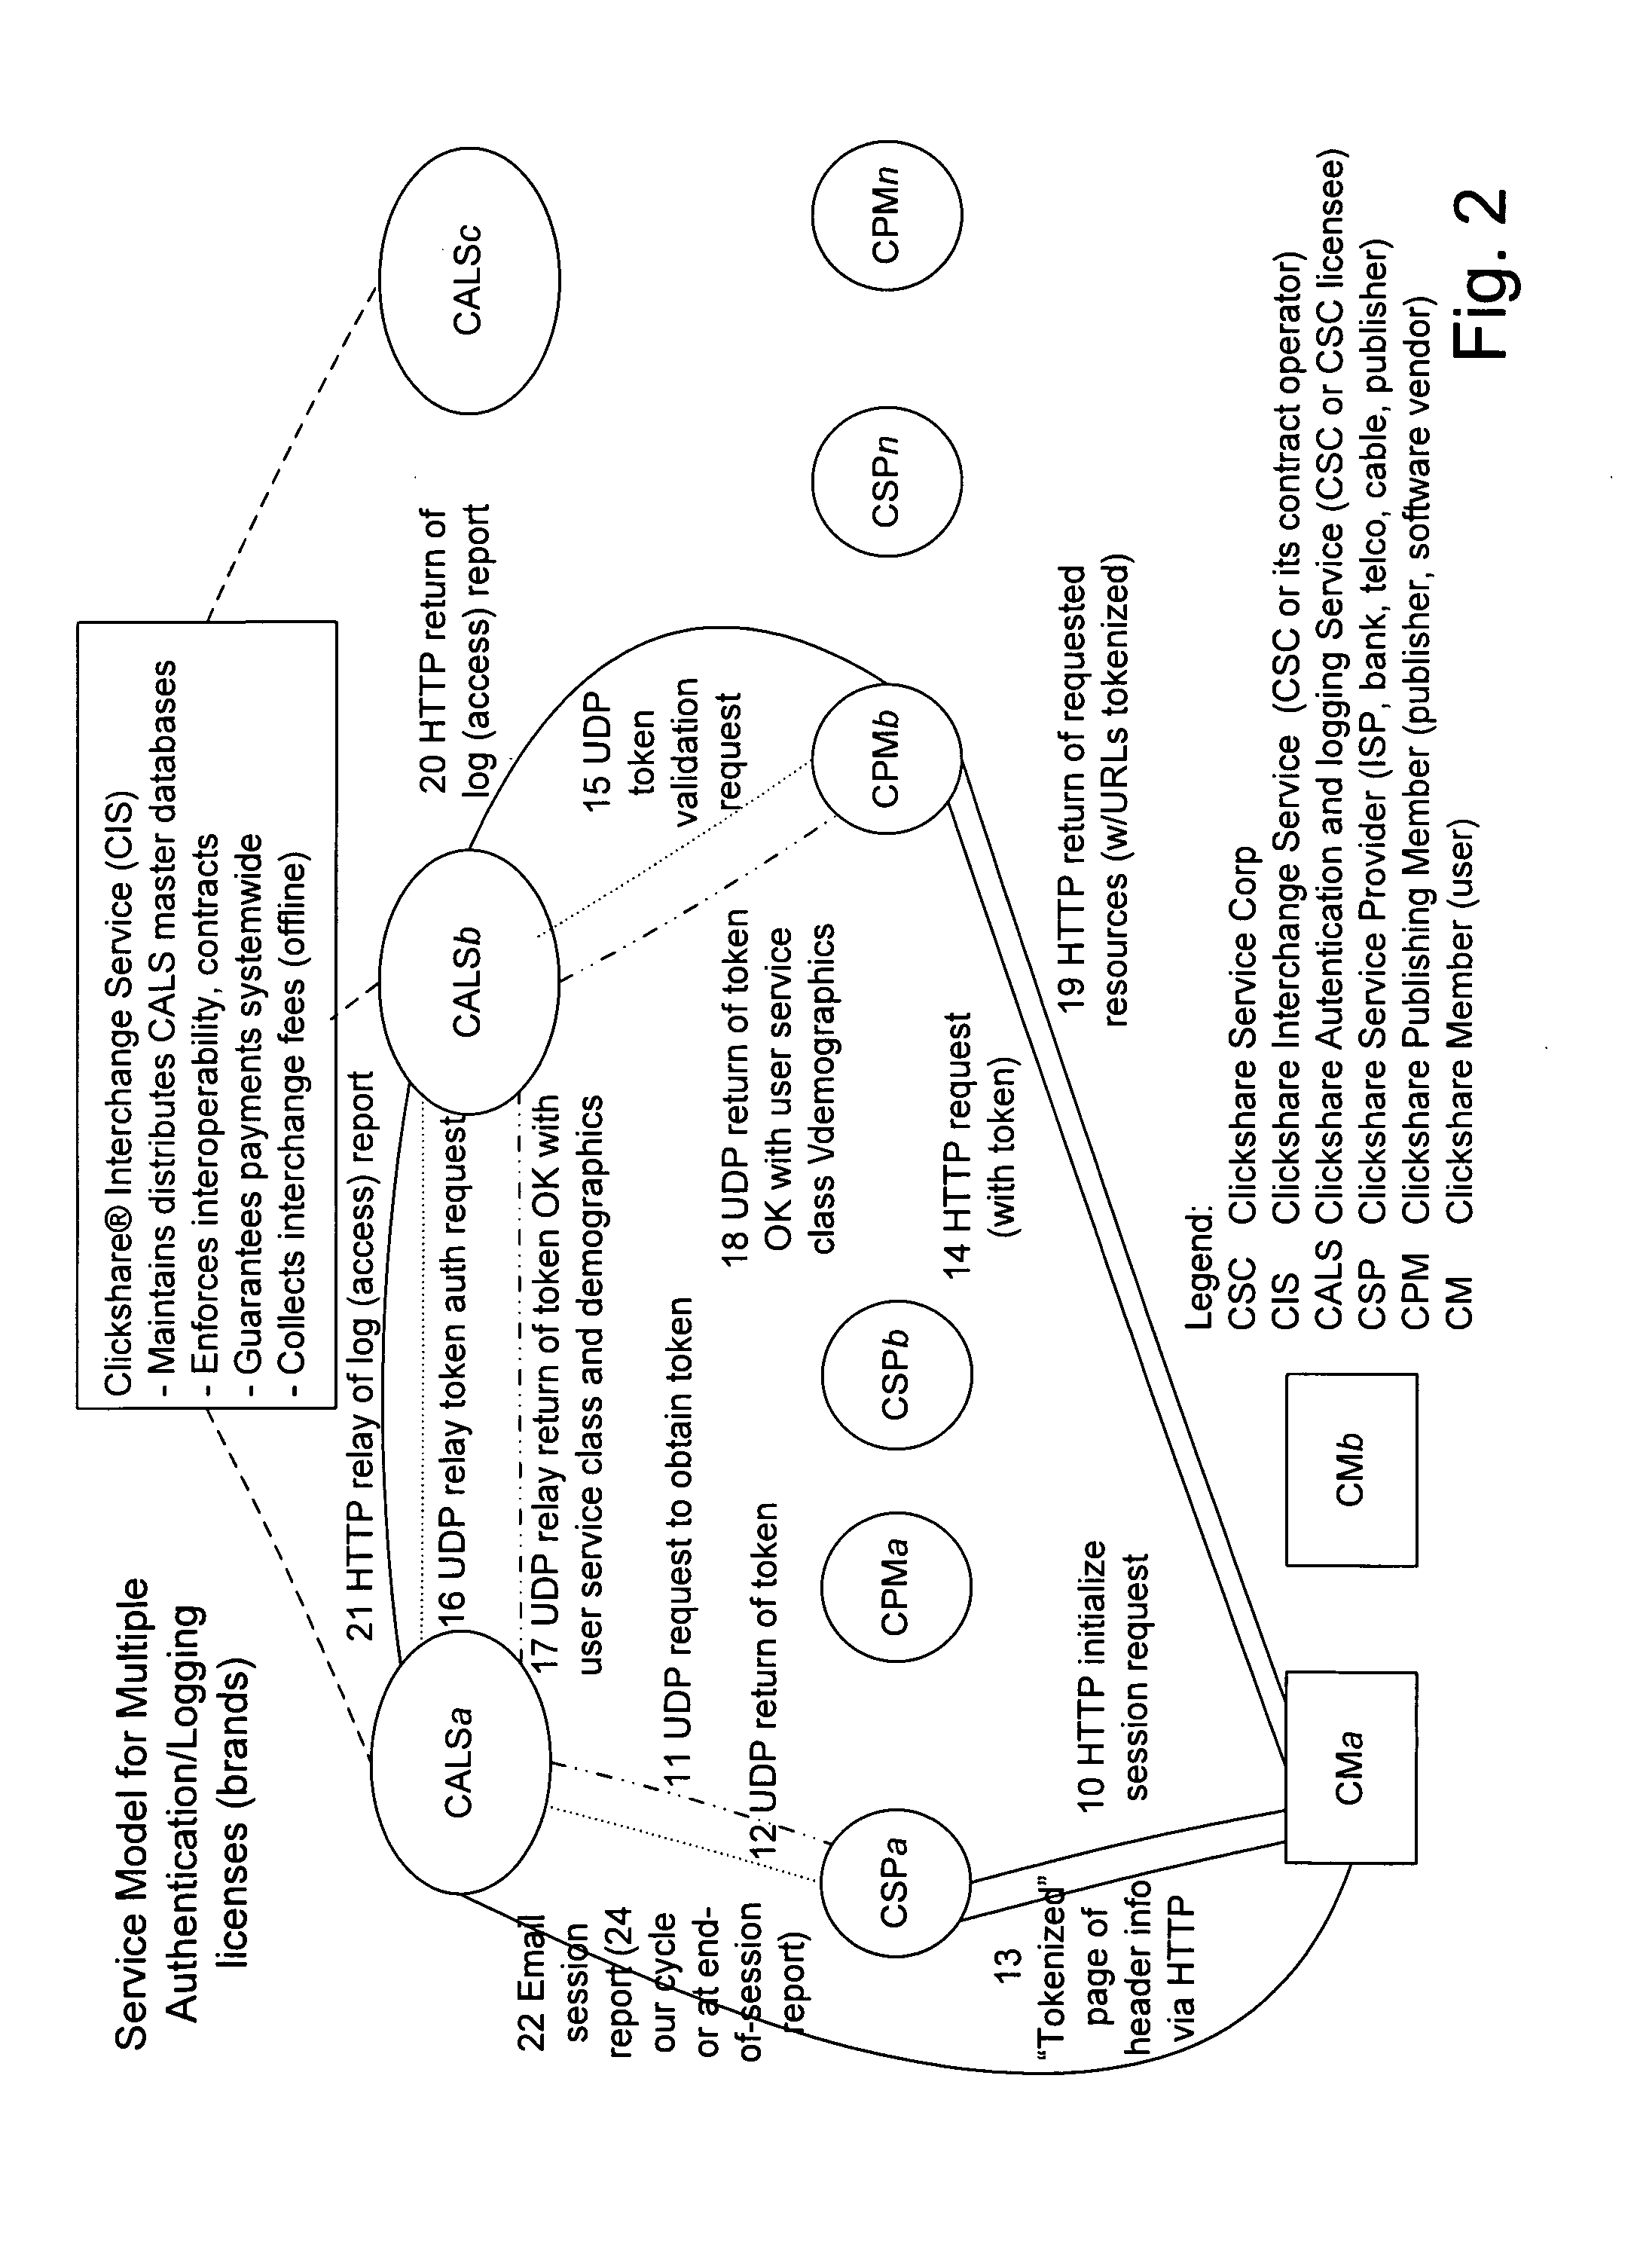 System for management of alternatively priced transactions on network